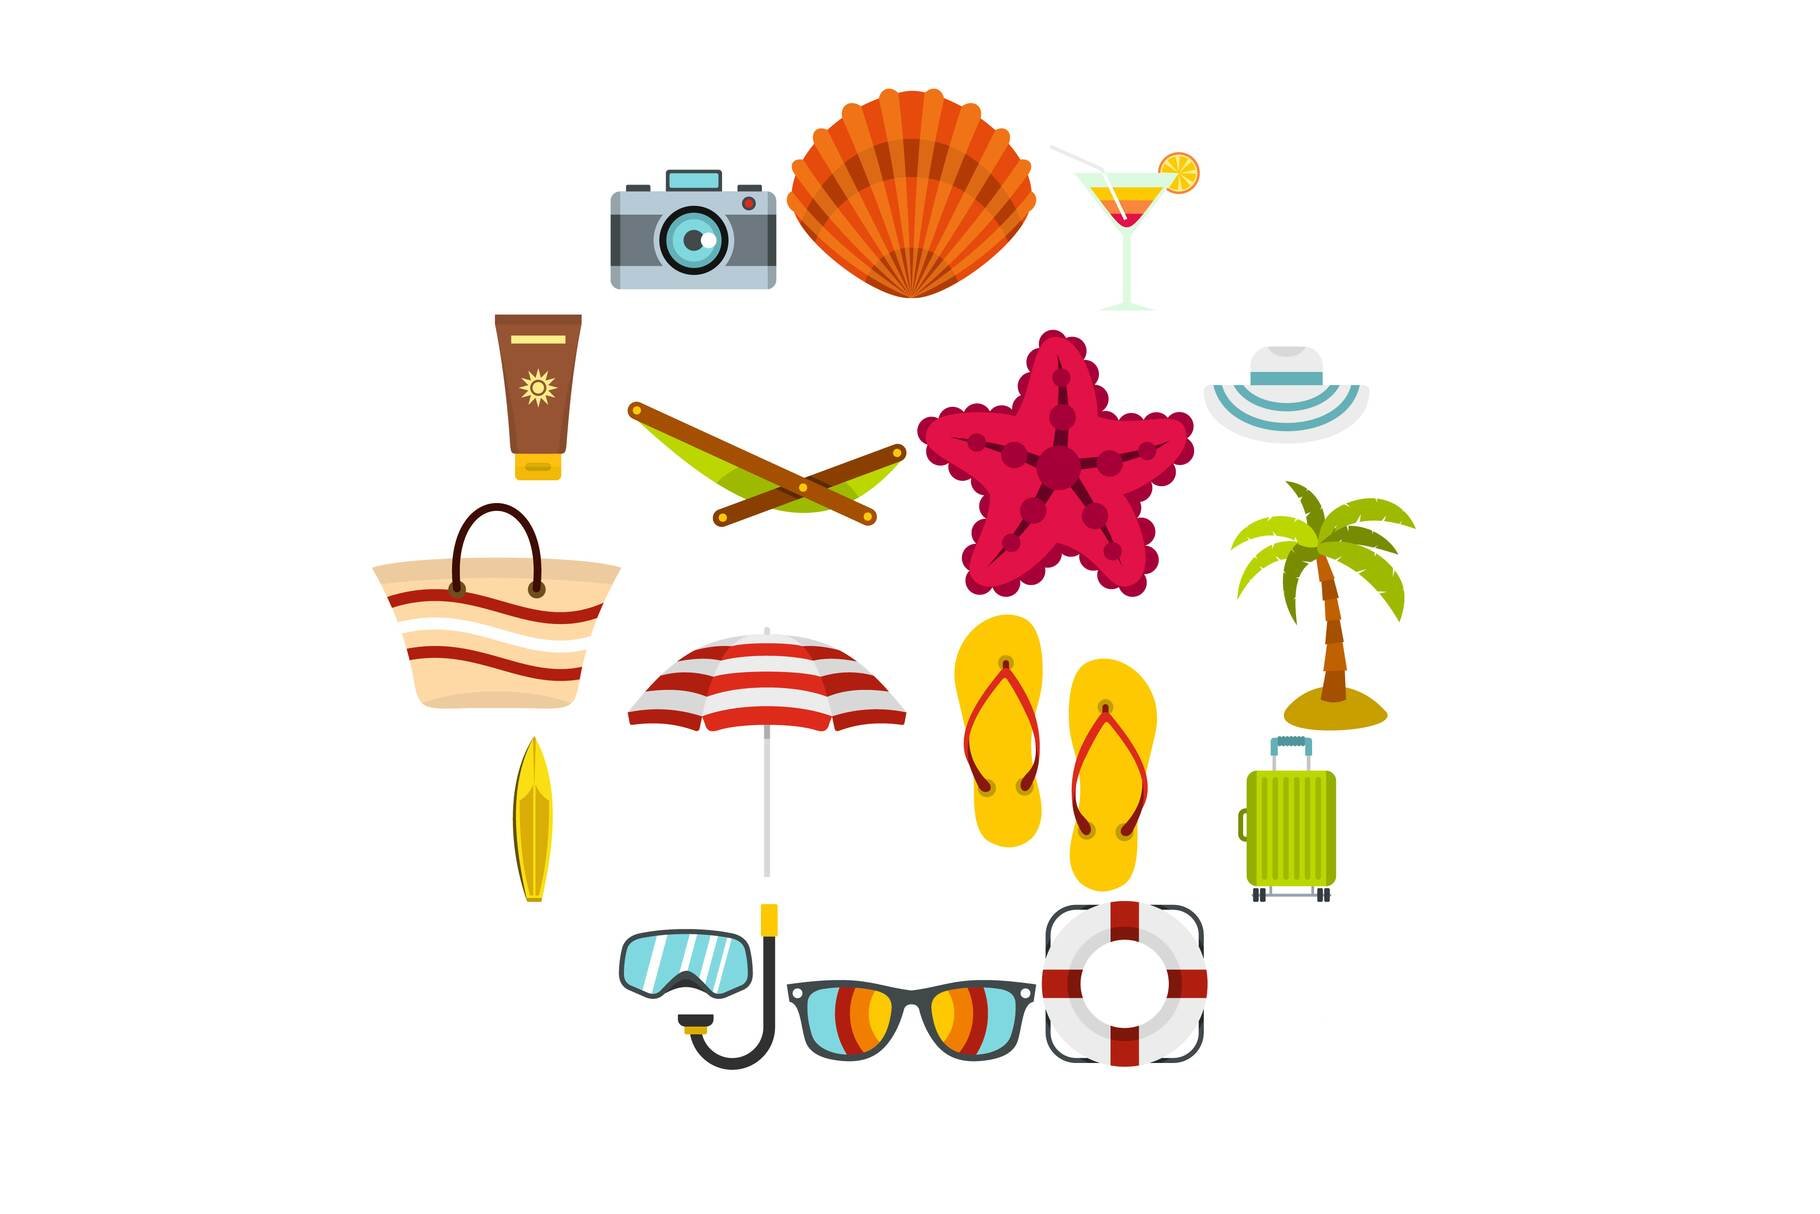 Summer rest set flat icons cover image.